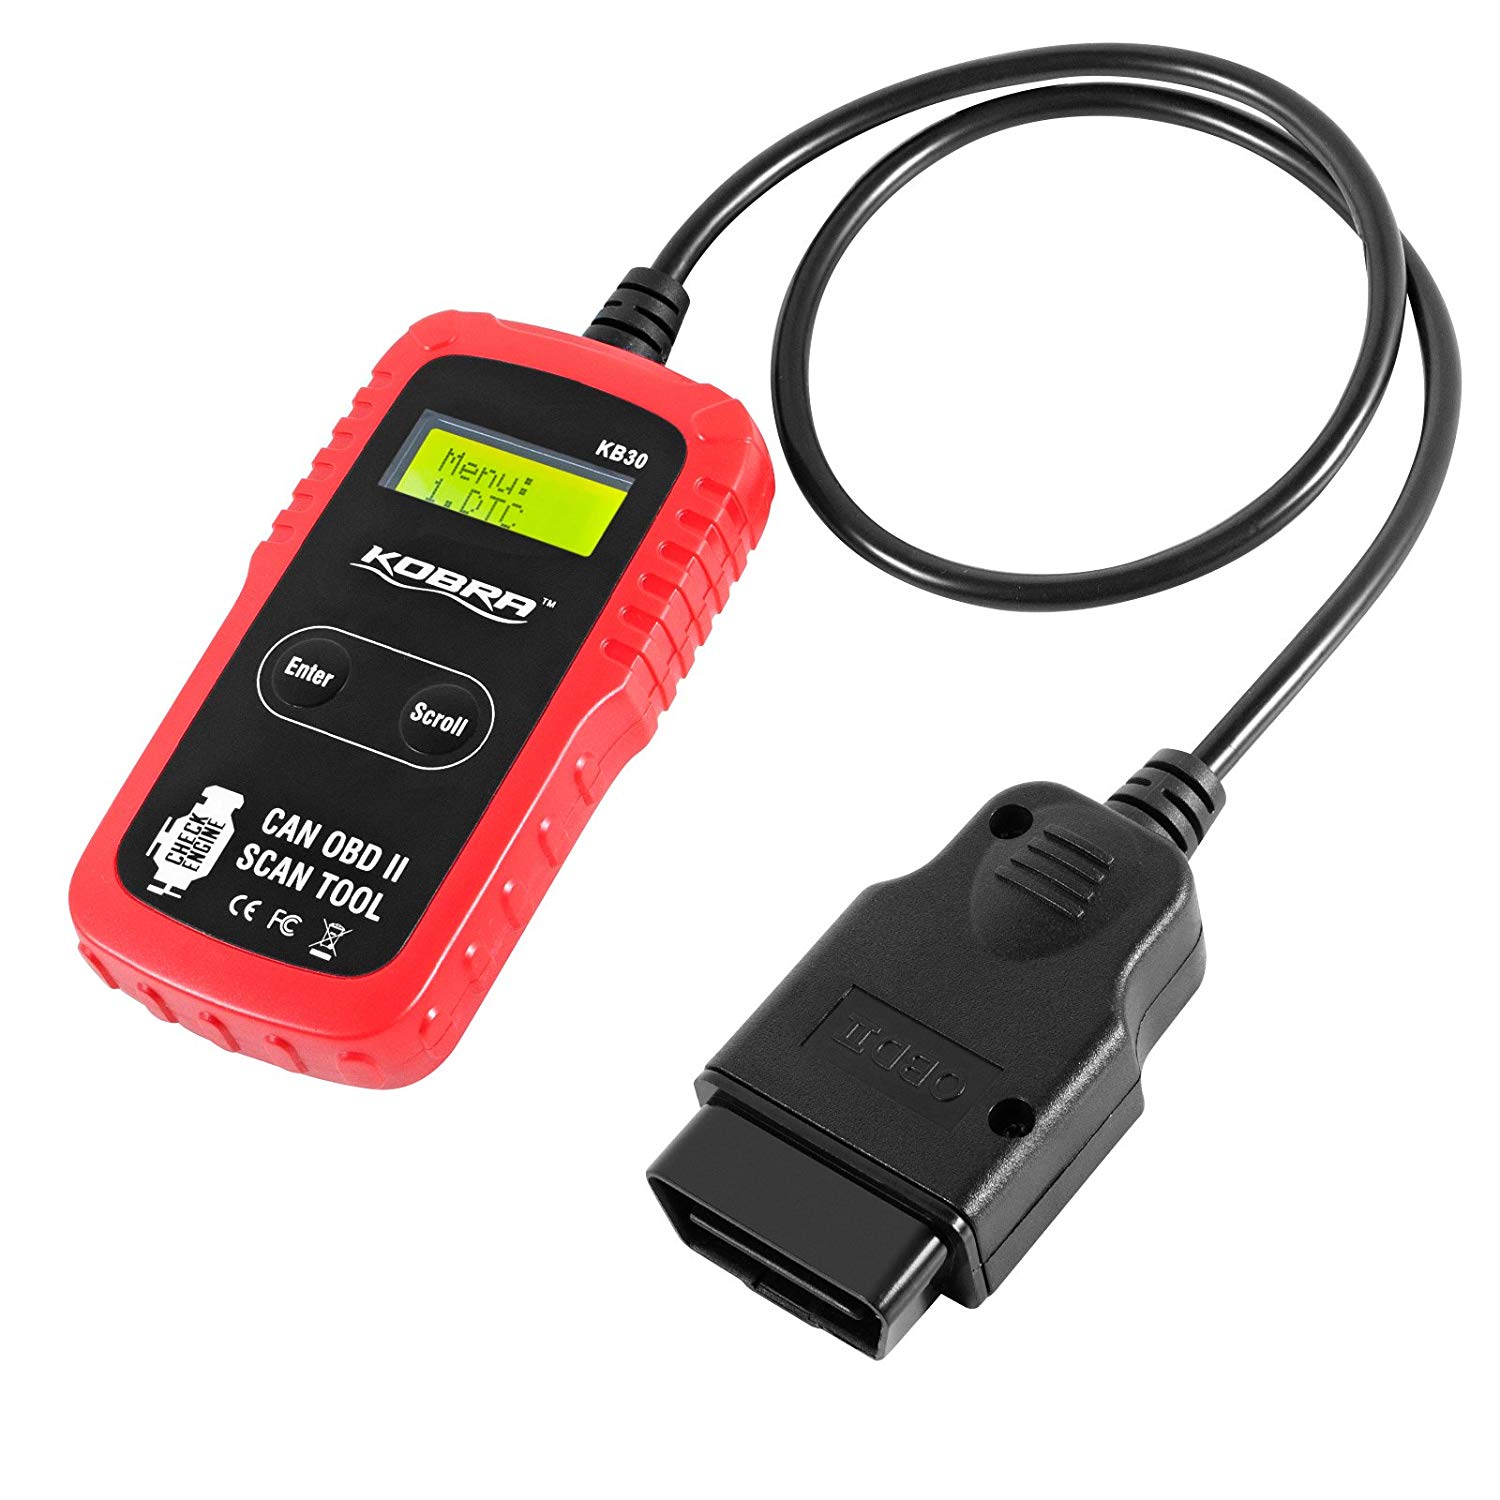 OBD2 Scan Tool – Clears Check Engine Lights Instantly – Diagnose Over 3000 Car Codes – Wired Car Diagnostic Scanner – Auto Scanner For All 1996+ Vehicles – OBD Scanner for Professionals